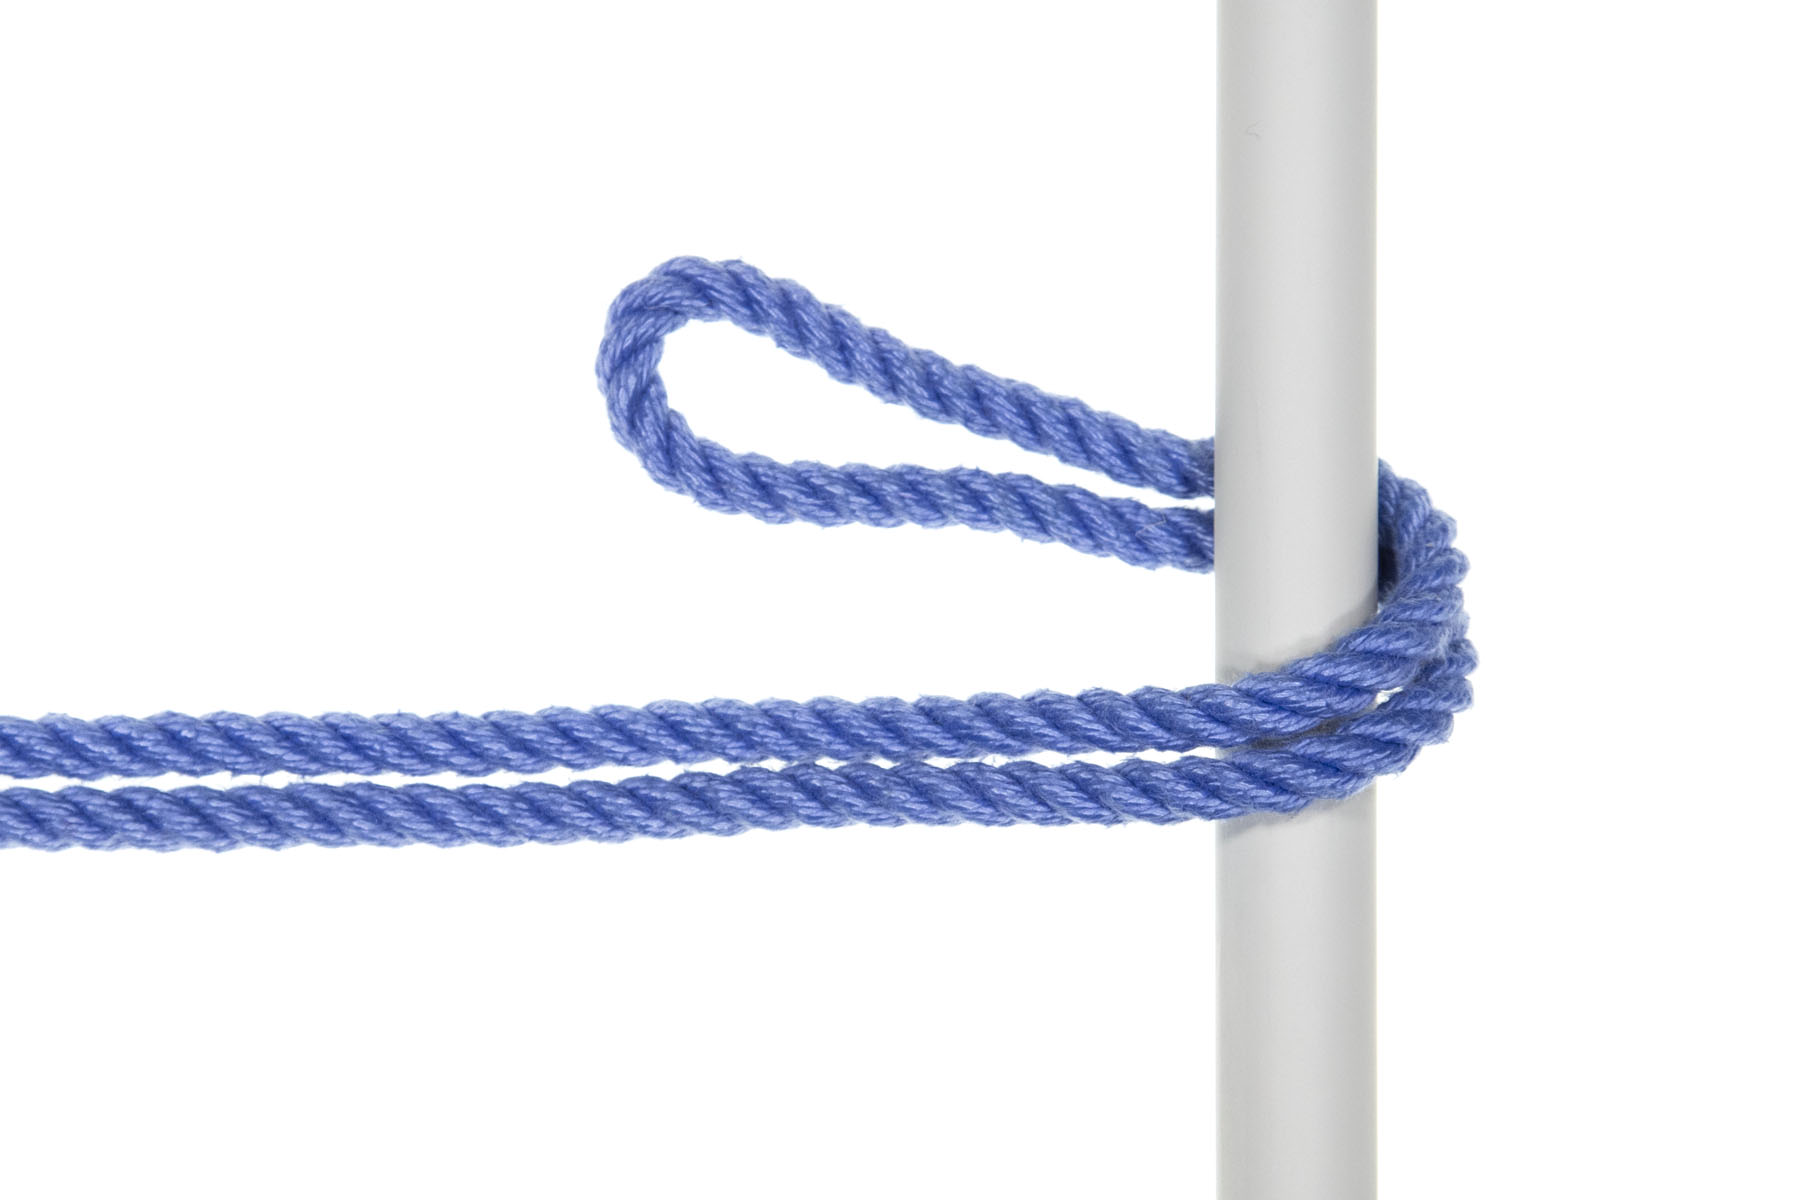 The bight of a doubled blue rope enters from the left and goes over and around a gray vertical pole. The bight is now pointing to the left.